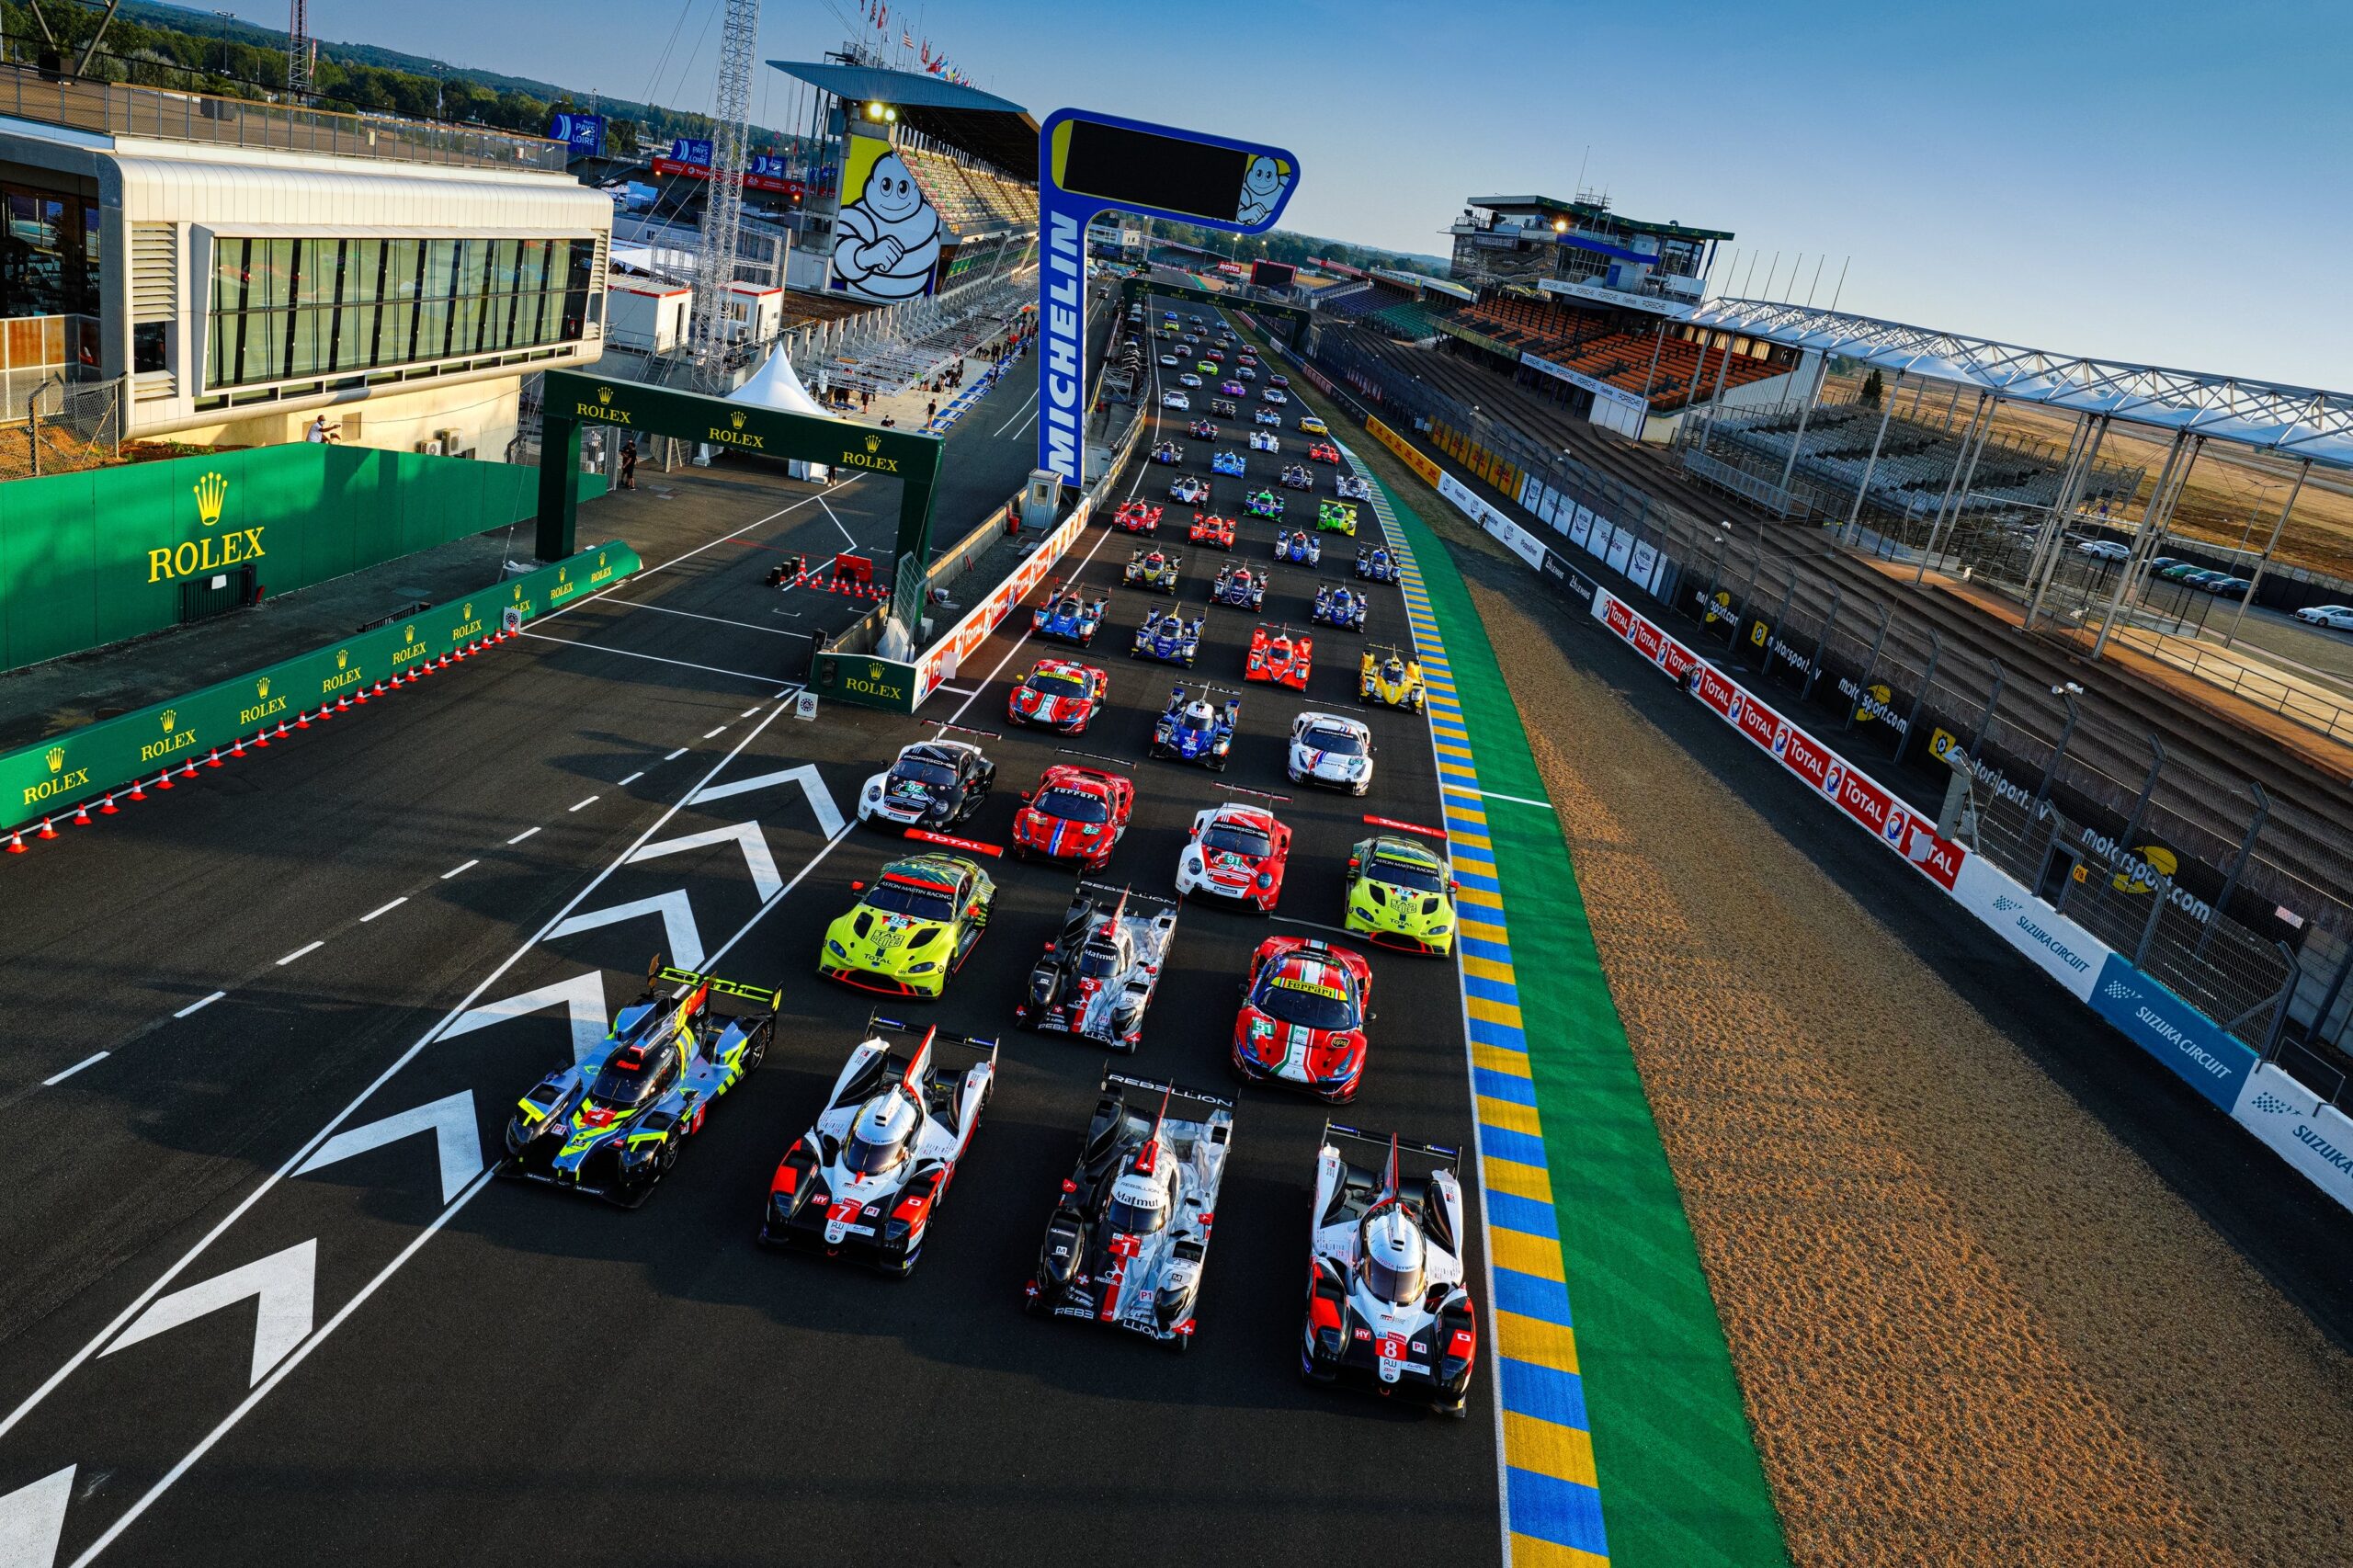 24 Hours of Le Mans 2020